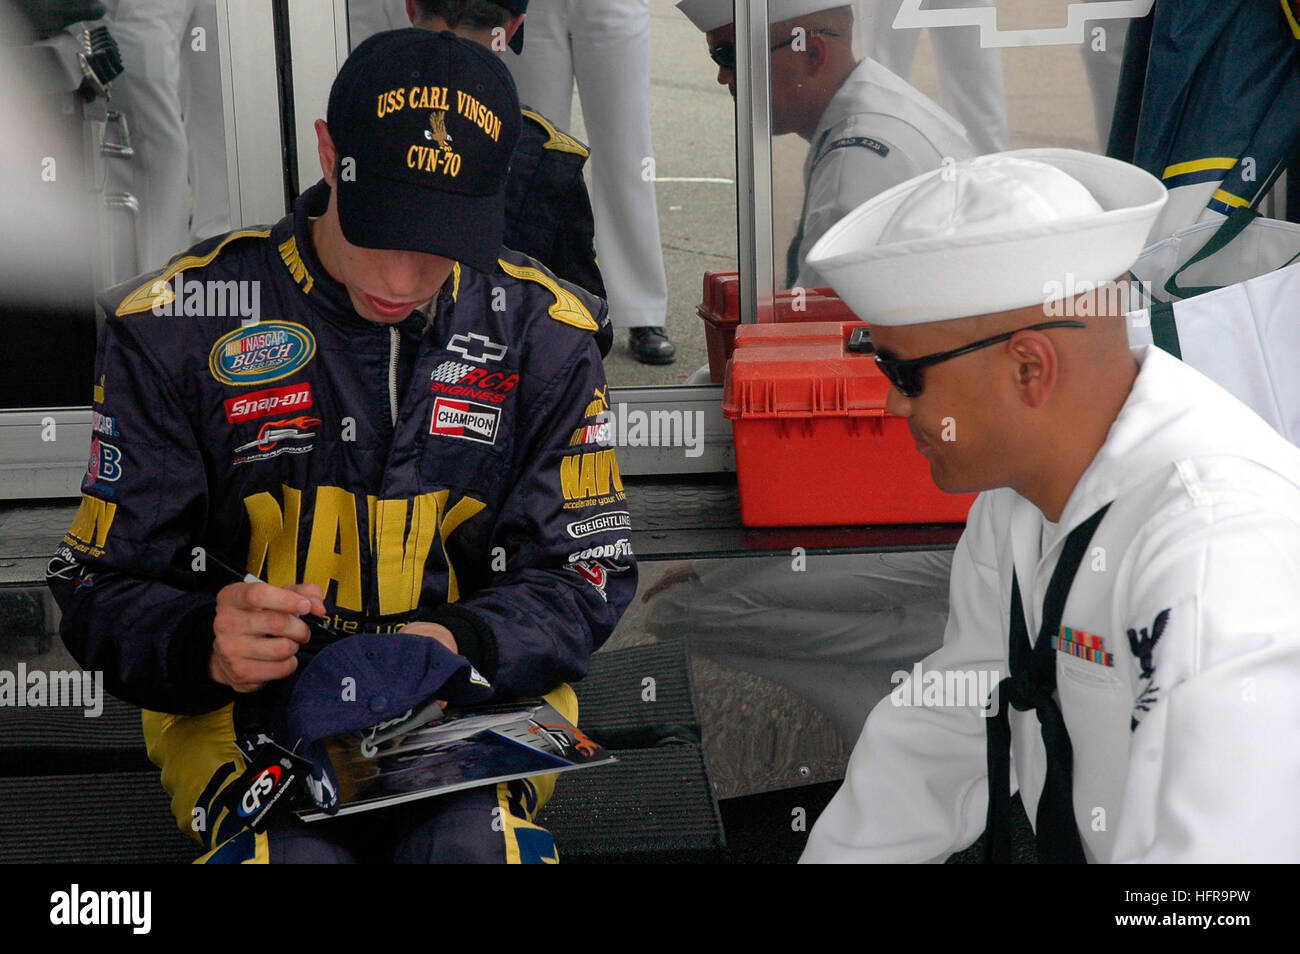 070728-N-3705H-186  INDIANAPOLIS (July 28, 2007) - Navy NASCAR team driver, Brad Keselowski, signs an autograph for a Sailor assigned to Nimitz-Class aircraft carrier USS Carl Vinson (CVN 70) during a meet-and-greet session before the Kroger 200 Busch Series race at O'Reilly Raceway Park. Seven Vinson Sailors attended the race to cheer on the No. 88 Navy Chevy Monte Carlo. U.S. Navy photo by Mass Communication Specialist Nina Hughes (RELEASED) US Navy 070728-N-3705H-186 Navy NASCAR team driver, Brad Keselowski, signs an autograph for a Sailor assigned to Nimitz-Class aircraft carrier USS Carl  Stock Photo